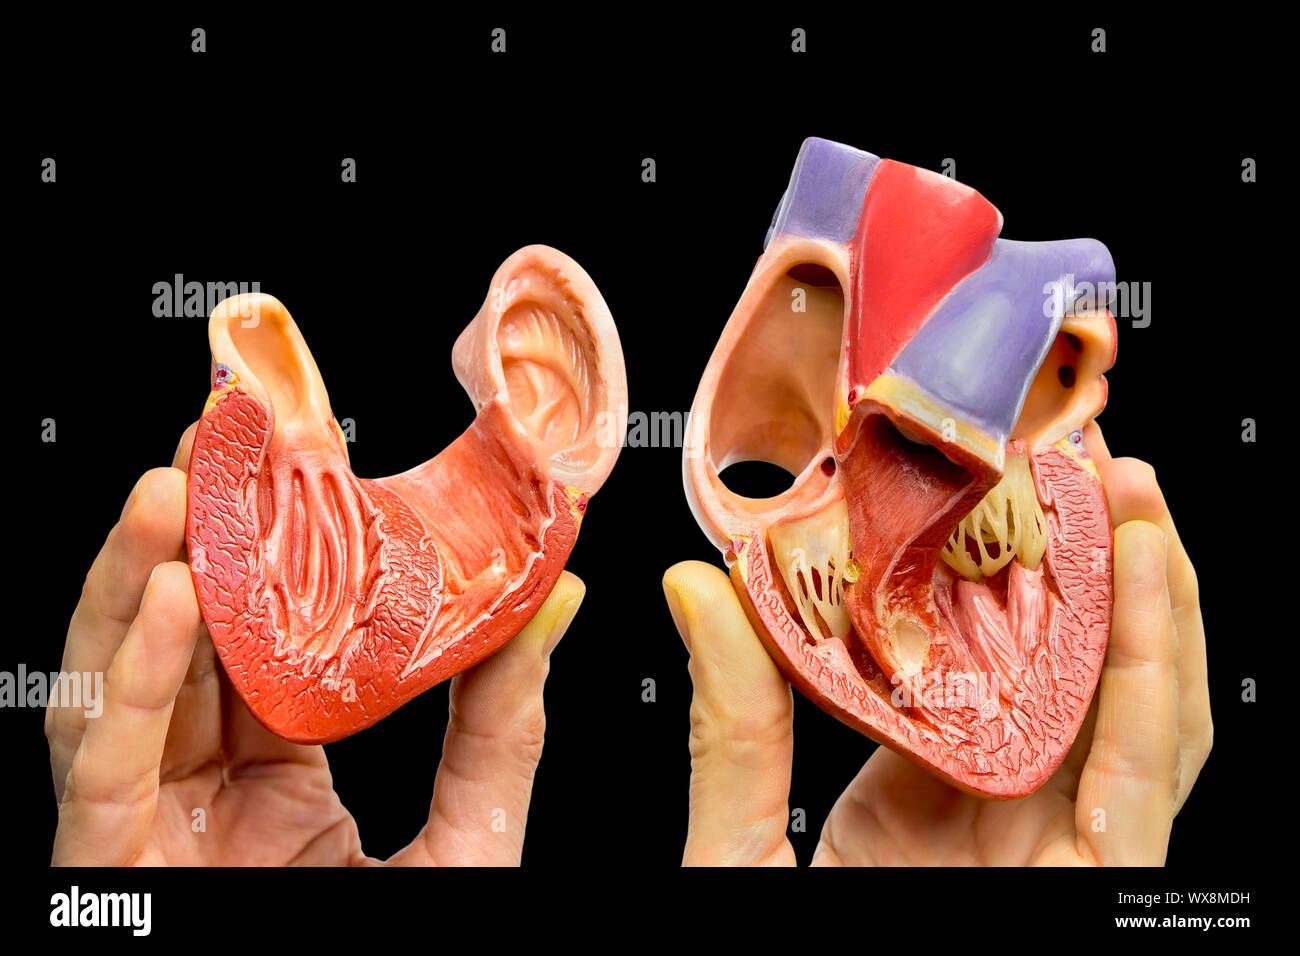 Fingers hold open human heart on black background Stock Photo